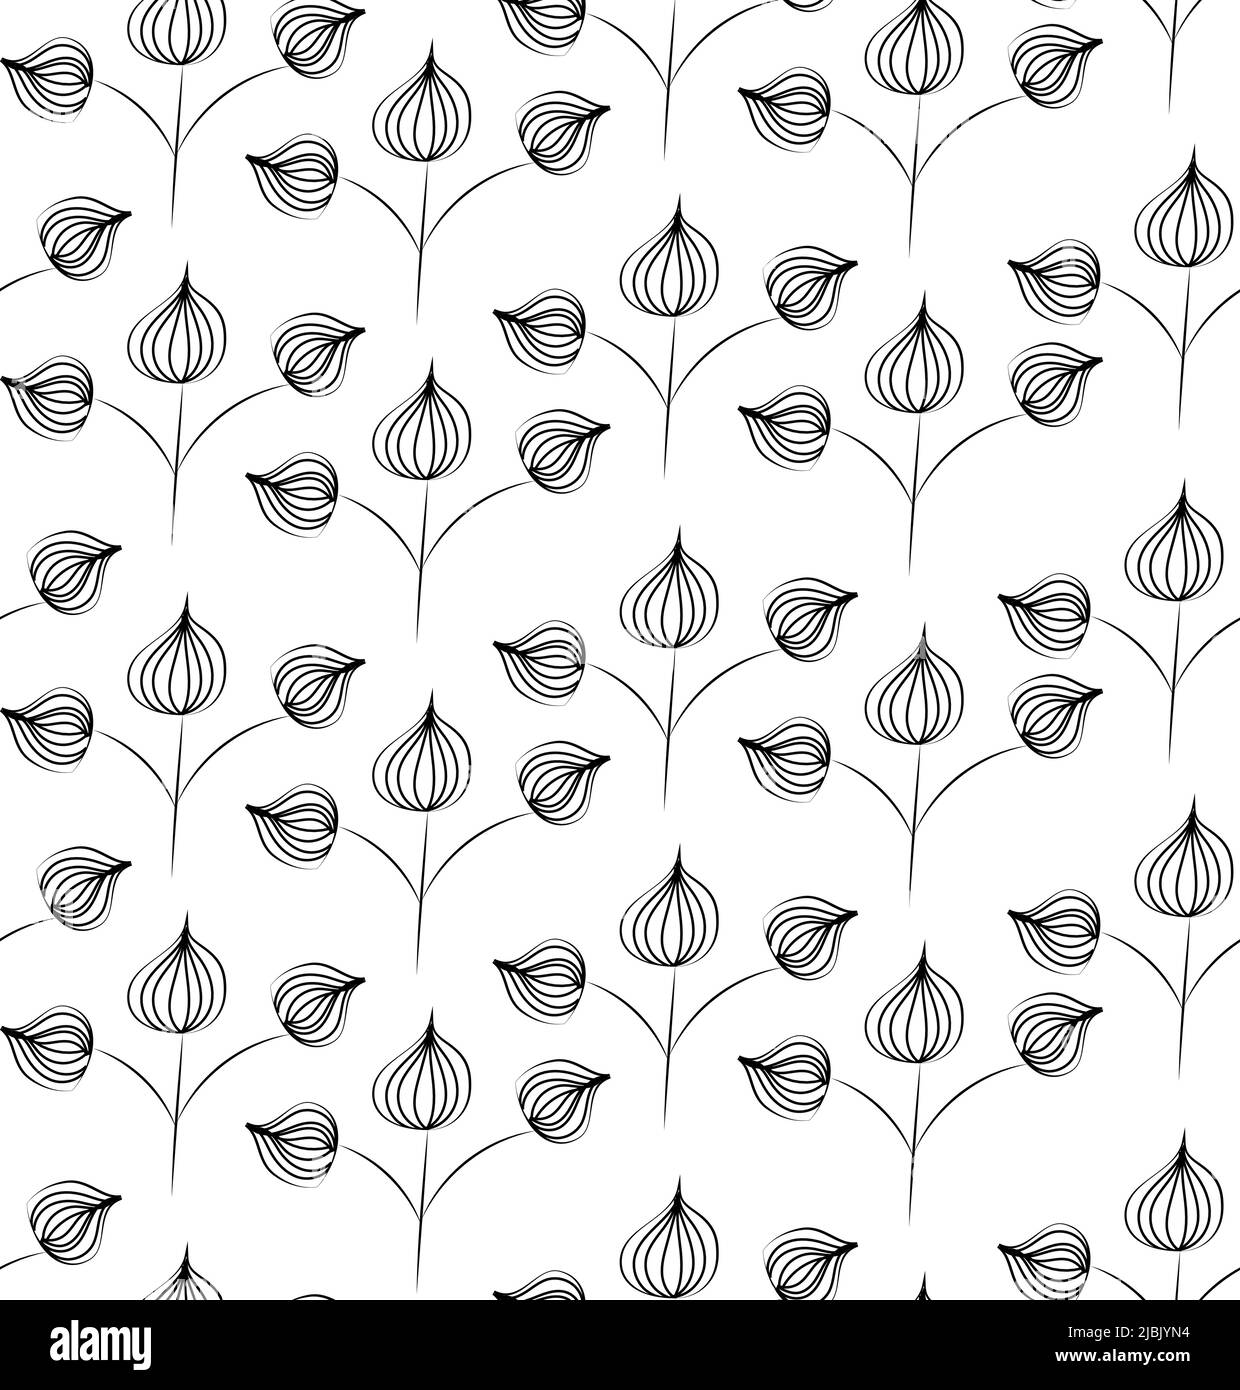 Floral vector seamless pattern with hand drawn black flowers on colorful leaves - Moire outline illustration Stock Vector